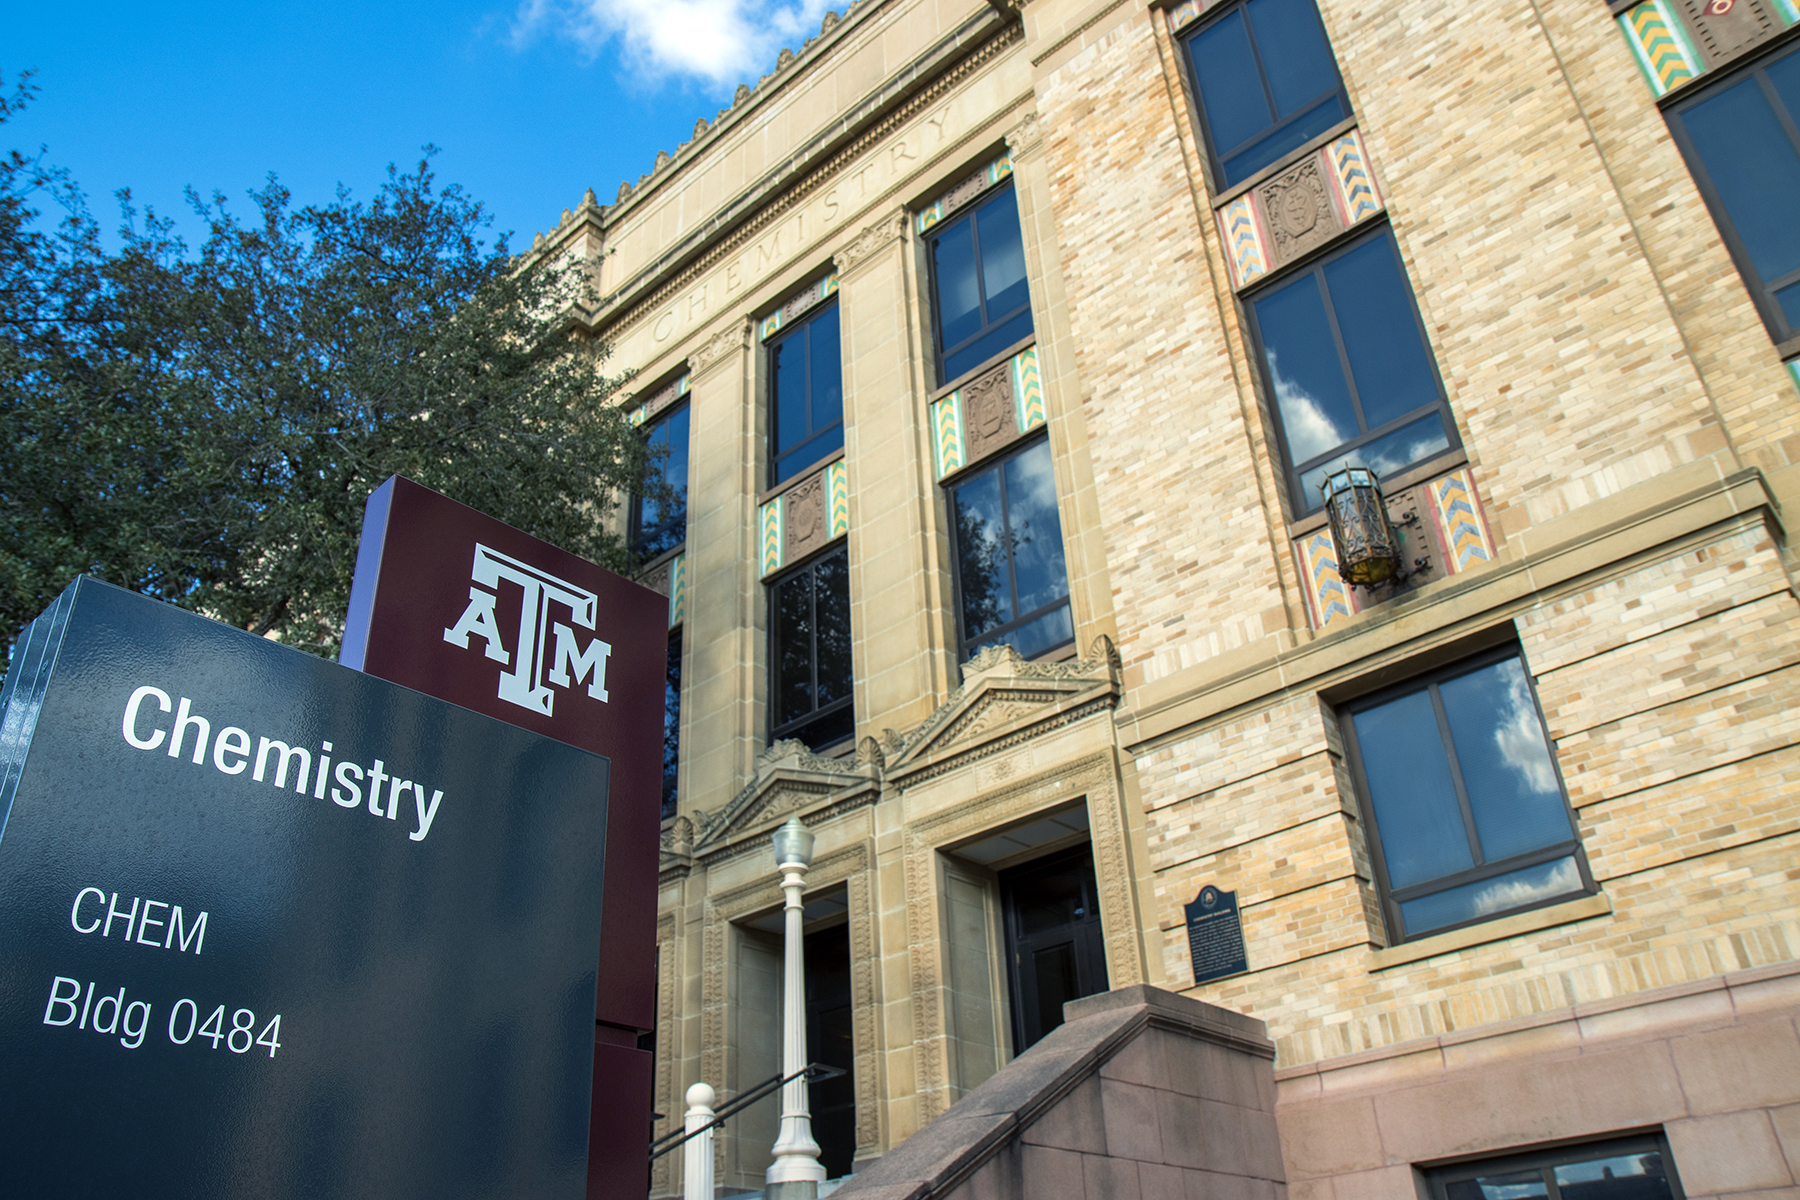 Exterior view of the Chemistry Building at Texas A&M University